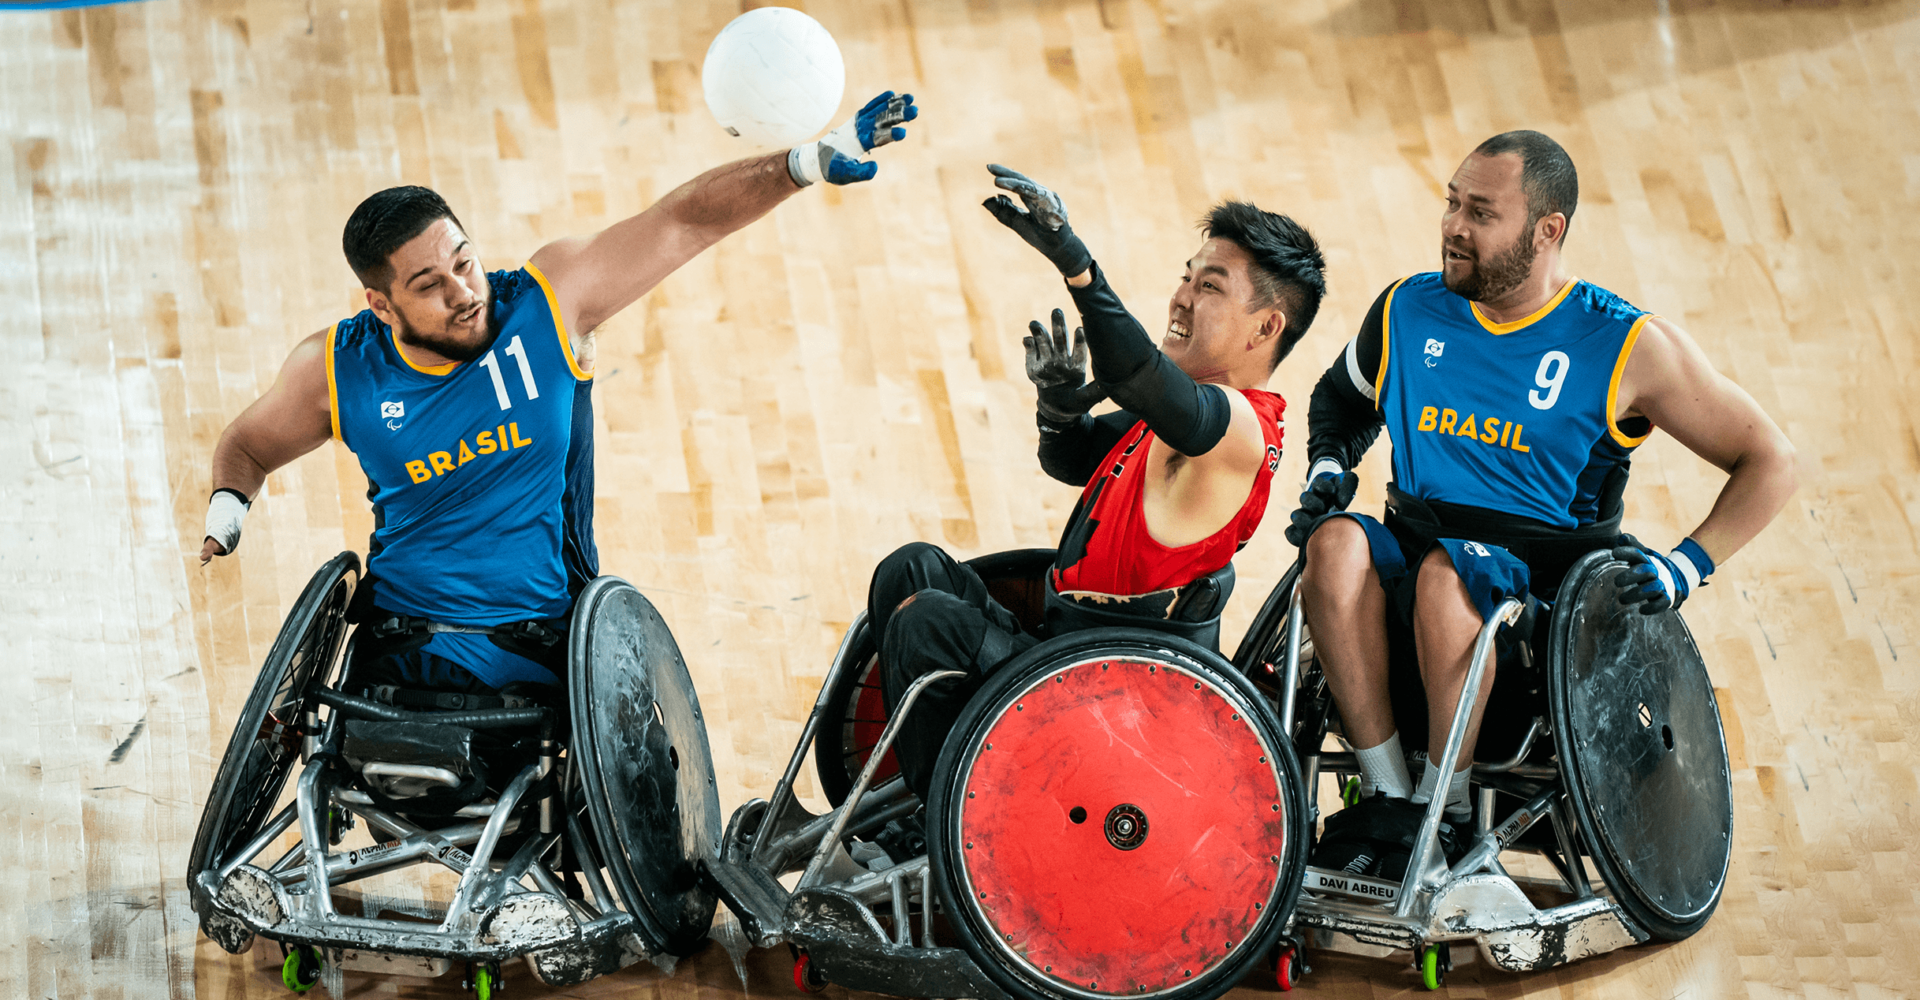 CANADA’S WHEELCHAIR RUGBY TEAM  ADVANCE TO GOLD MEDAL GAME AT LIMA 2019